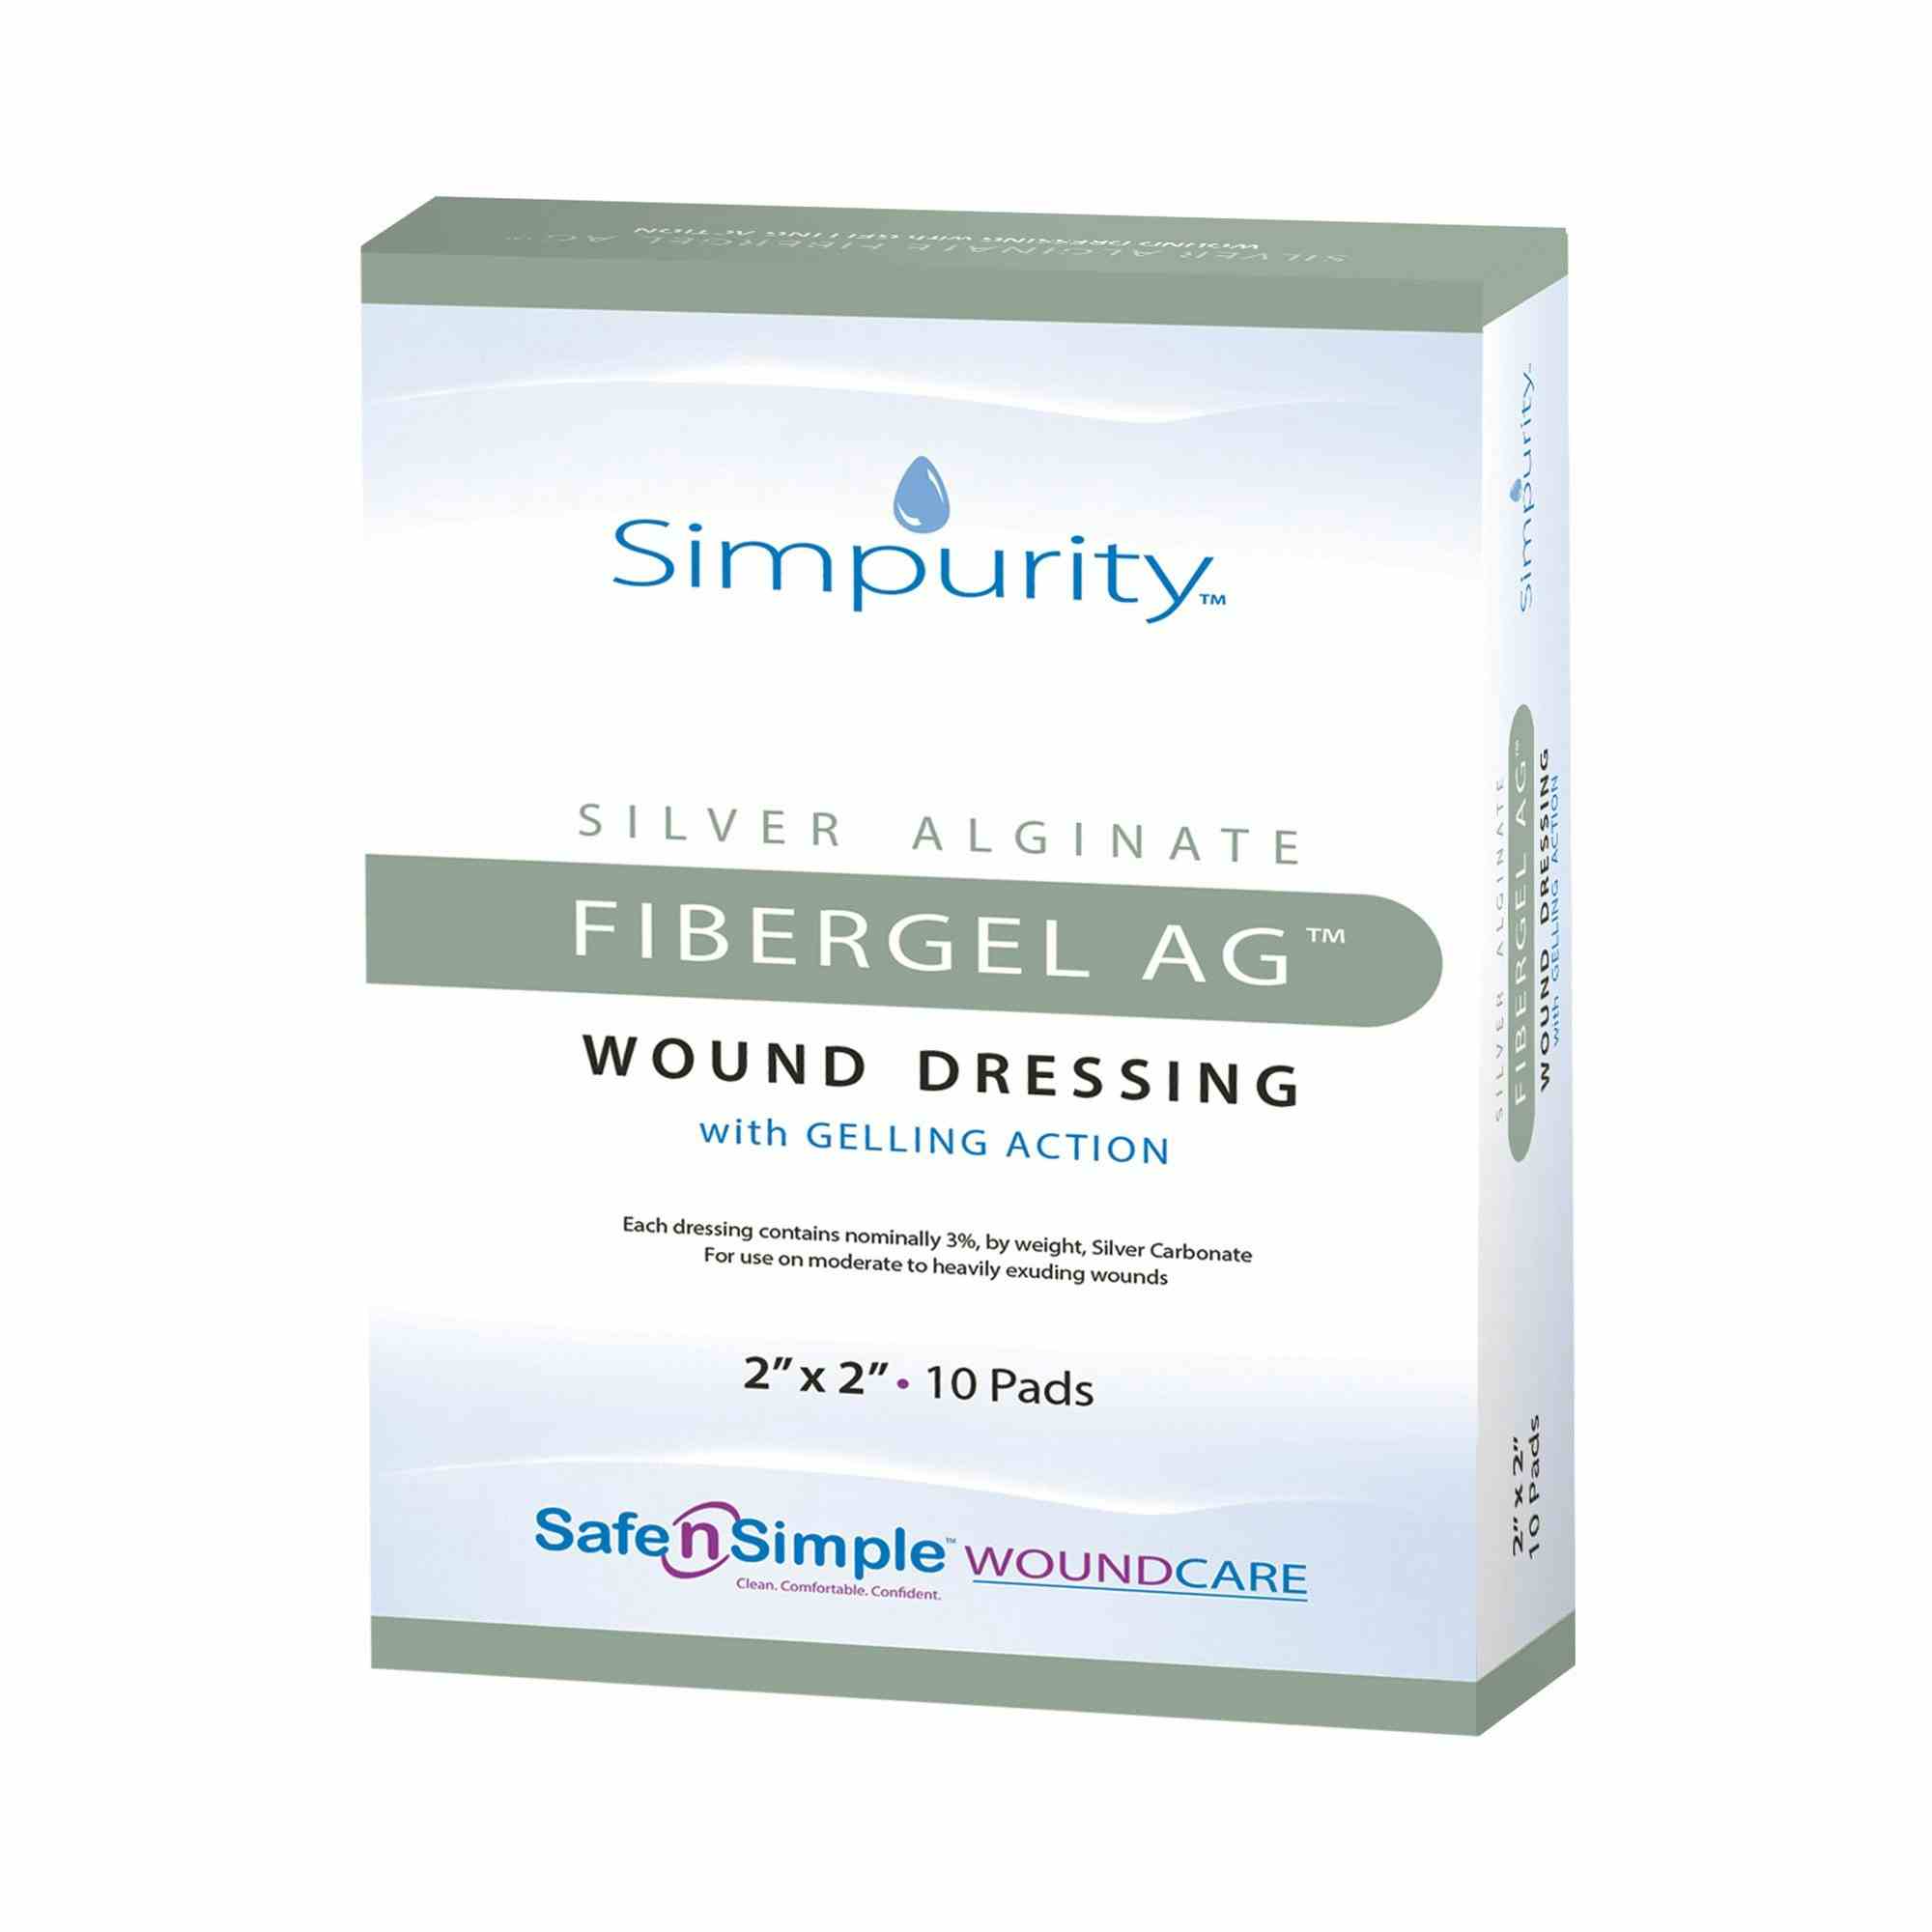 Safe N Simple Simpurity Fibergel AG Wound Dressing with Gelling Action, 2 X 2", SNS56712, Box of 10